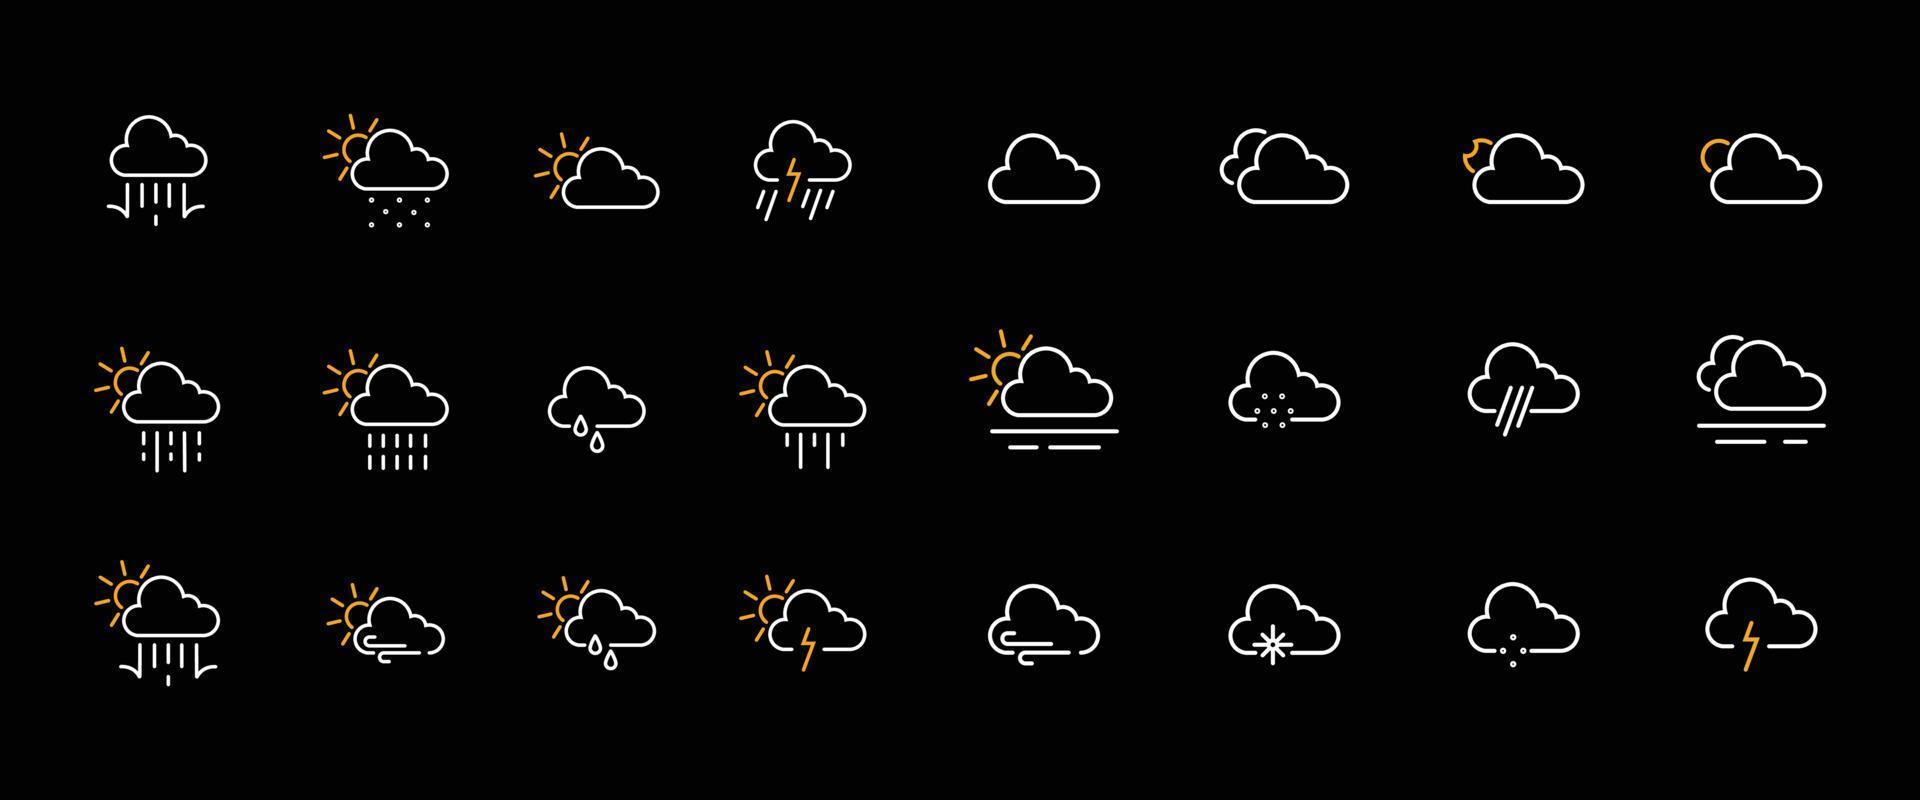 Overcast icons for weather forecast vector